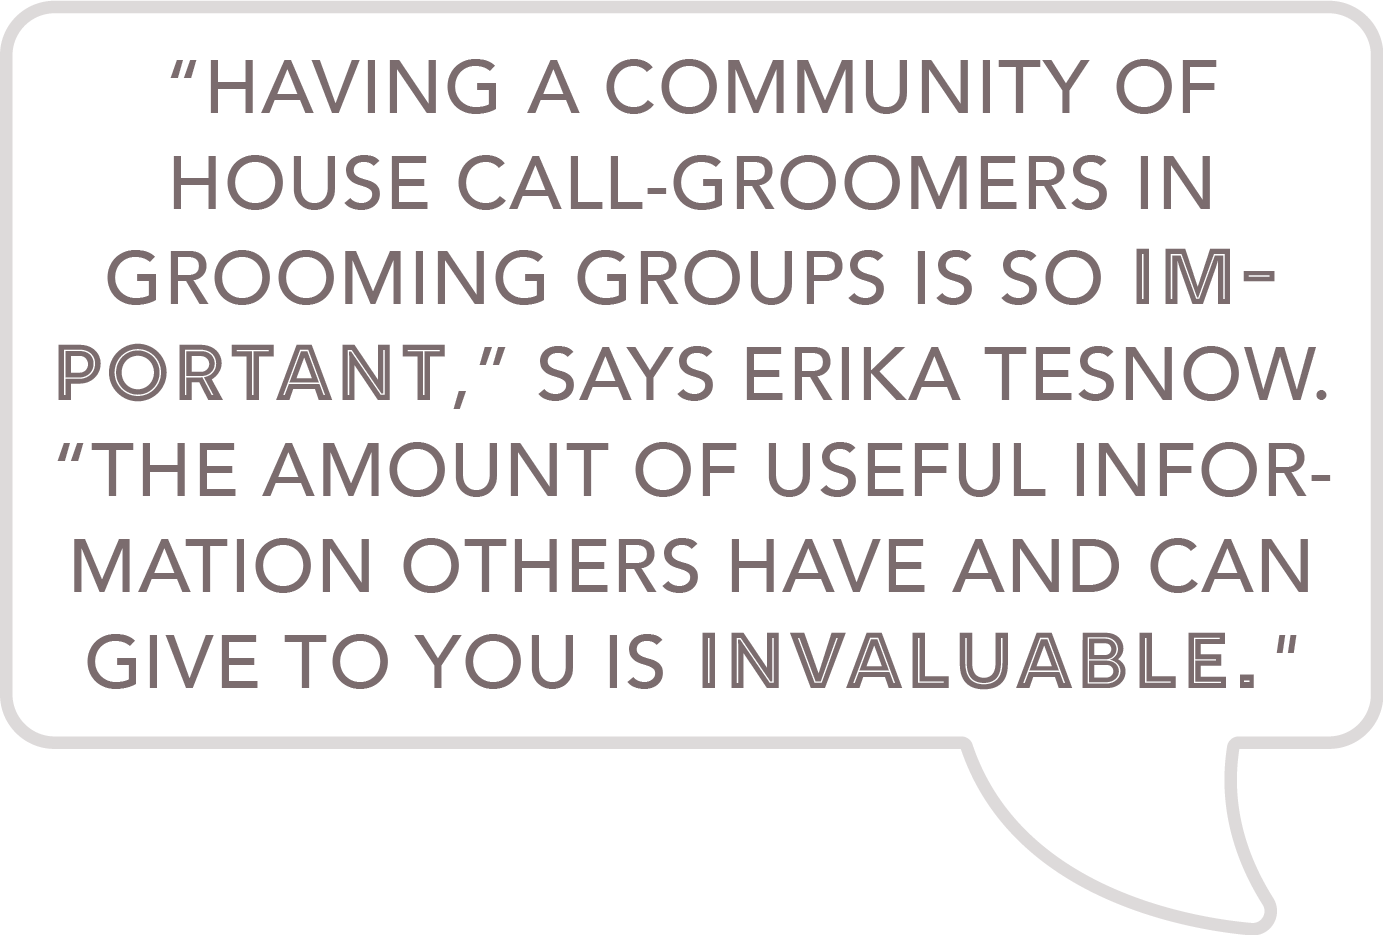 “Having a community of house call-groomers in grooming groups is so important,” says Erika Tesnow. “The amount of useful information others have and can give to you is invaluable."